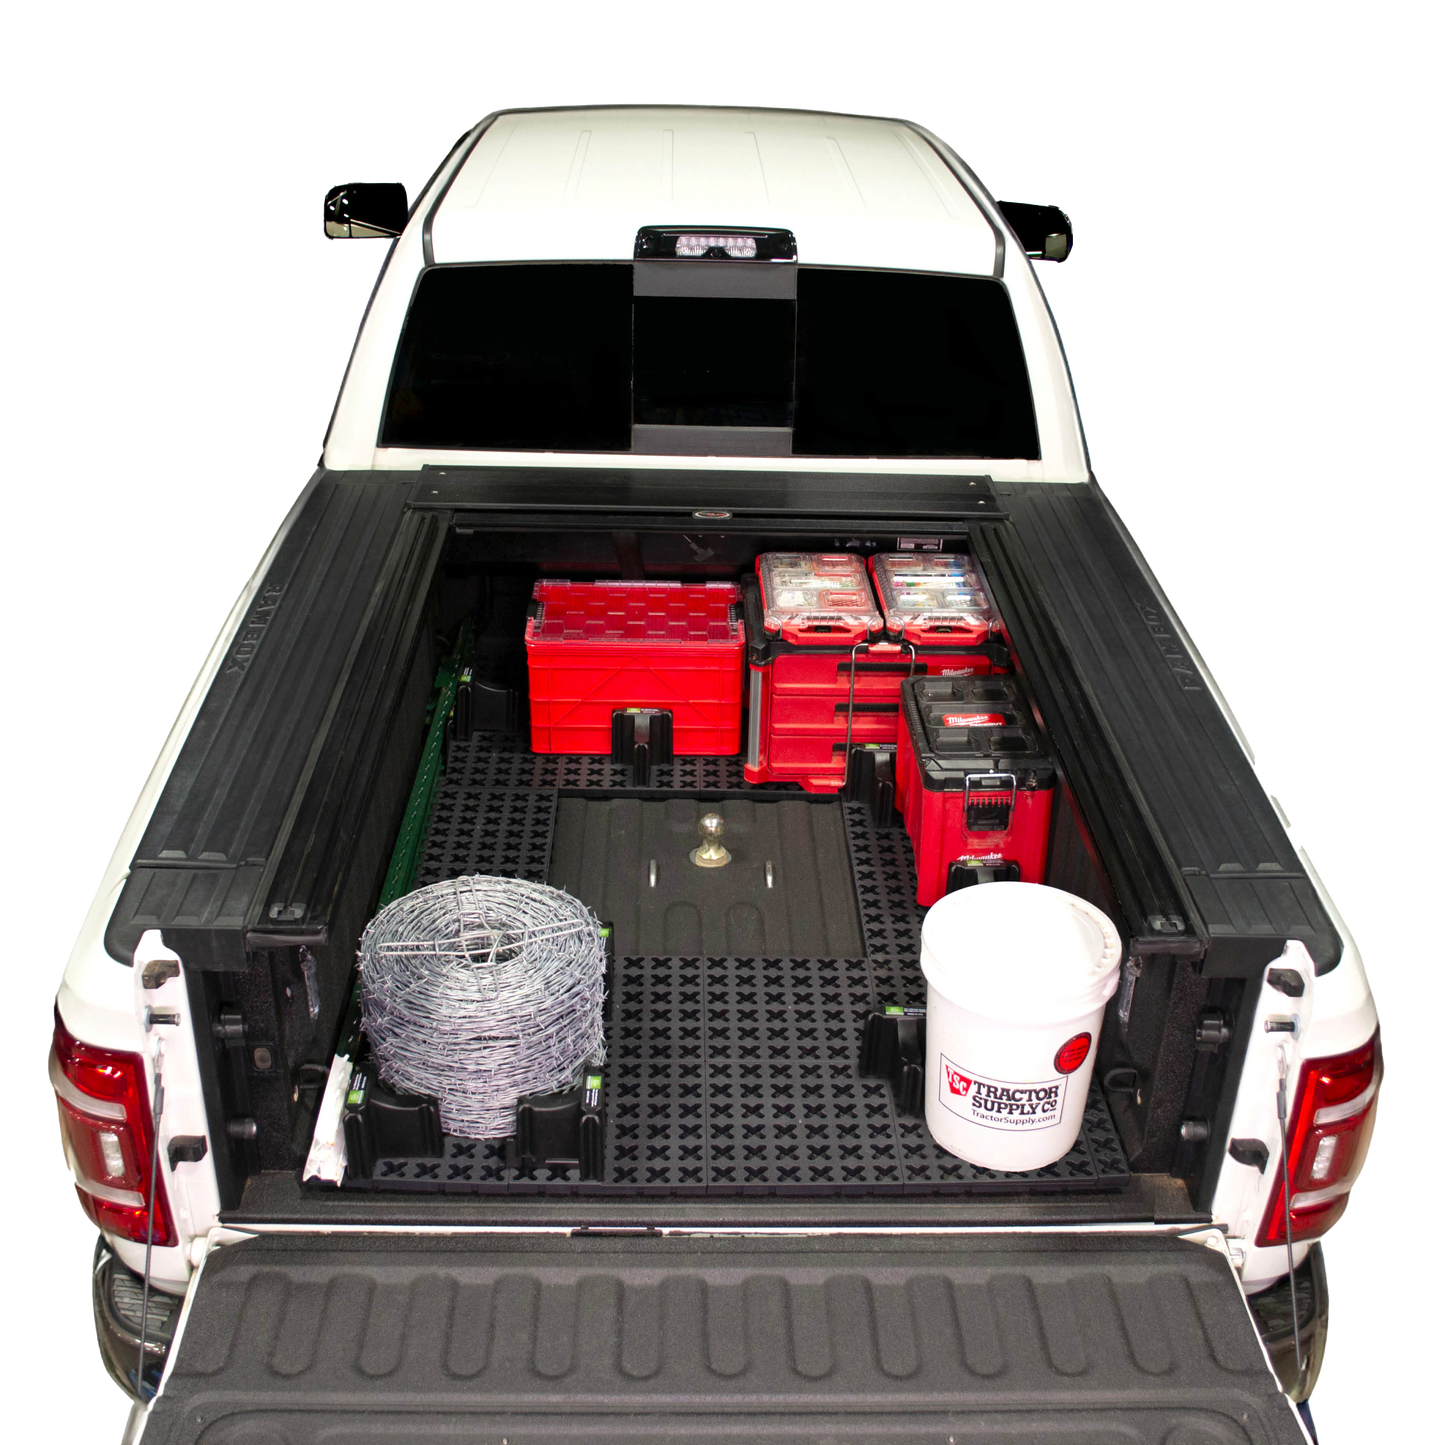 Tmat Truck Bed Organizer Slide Out Mat | Universal Fit for Standard Beds 6'6" to 6'9"